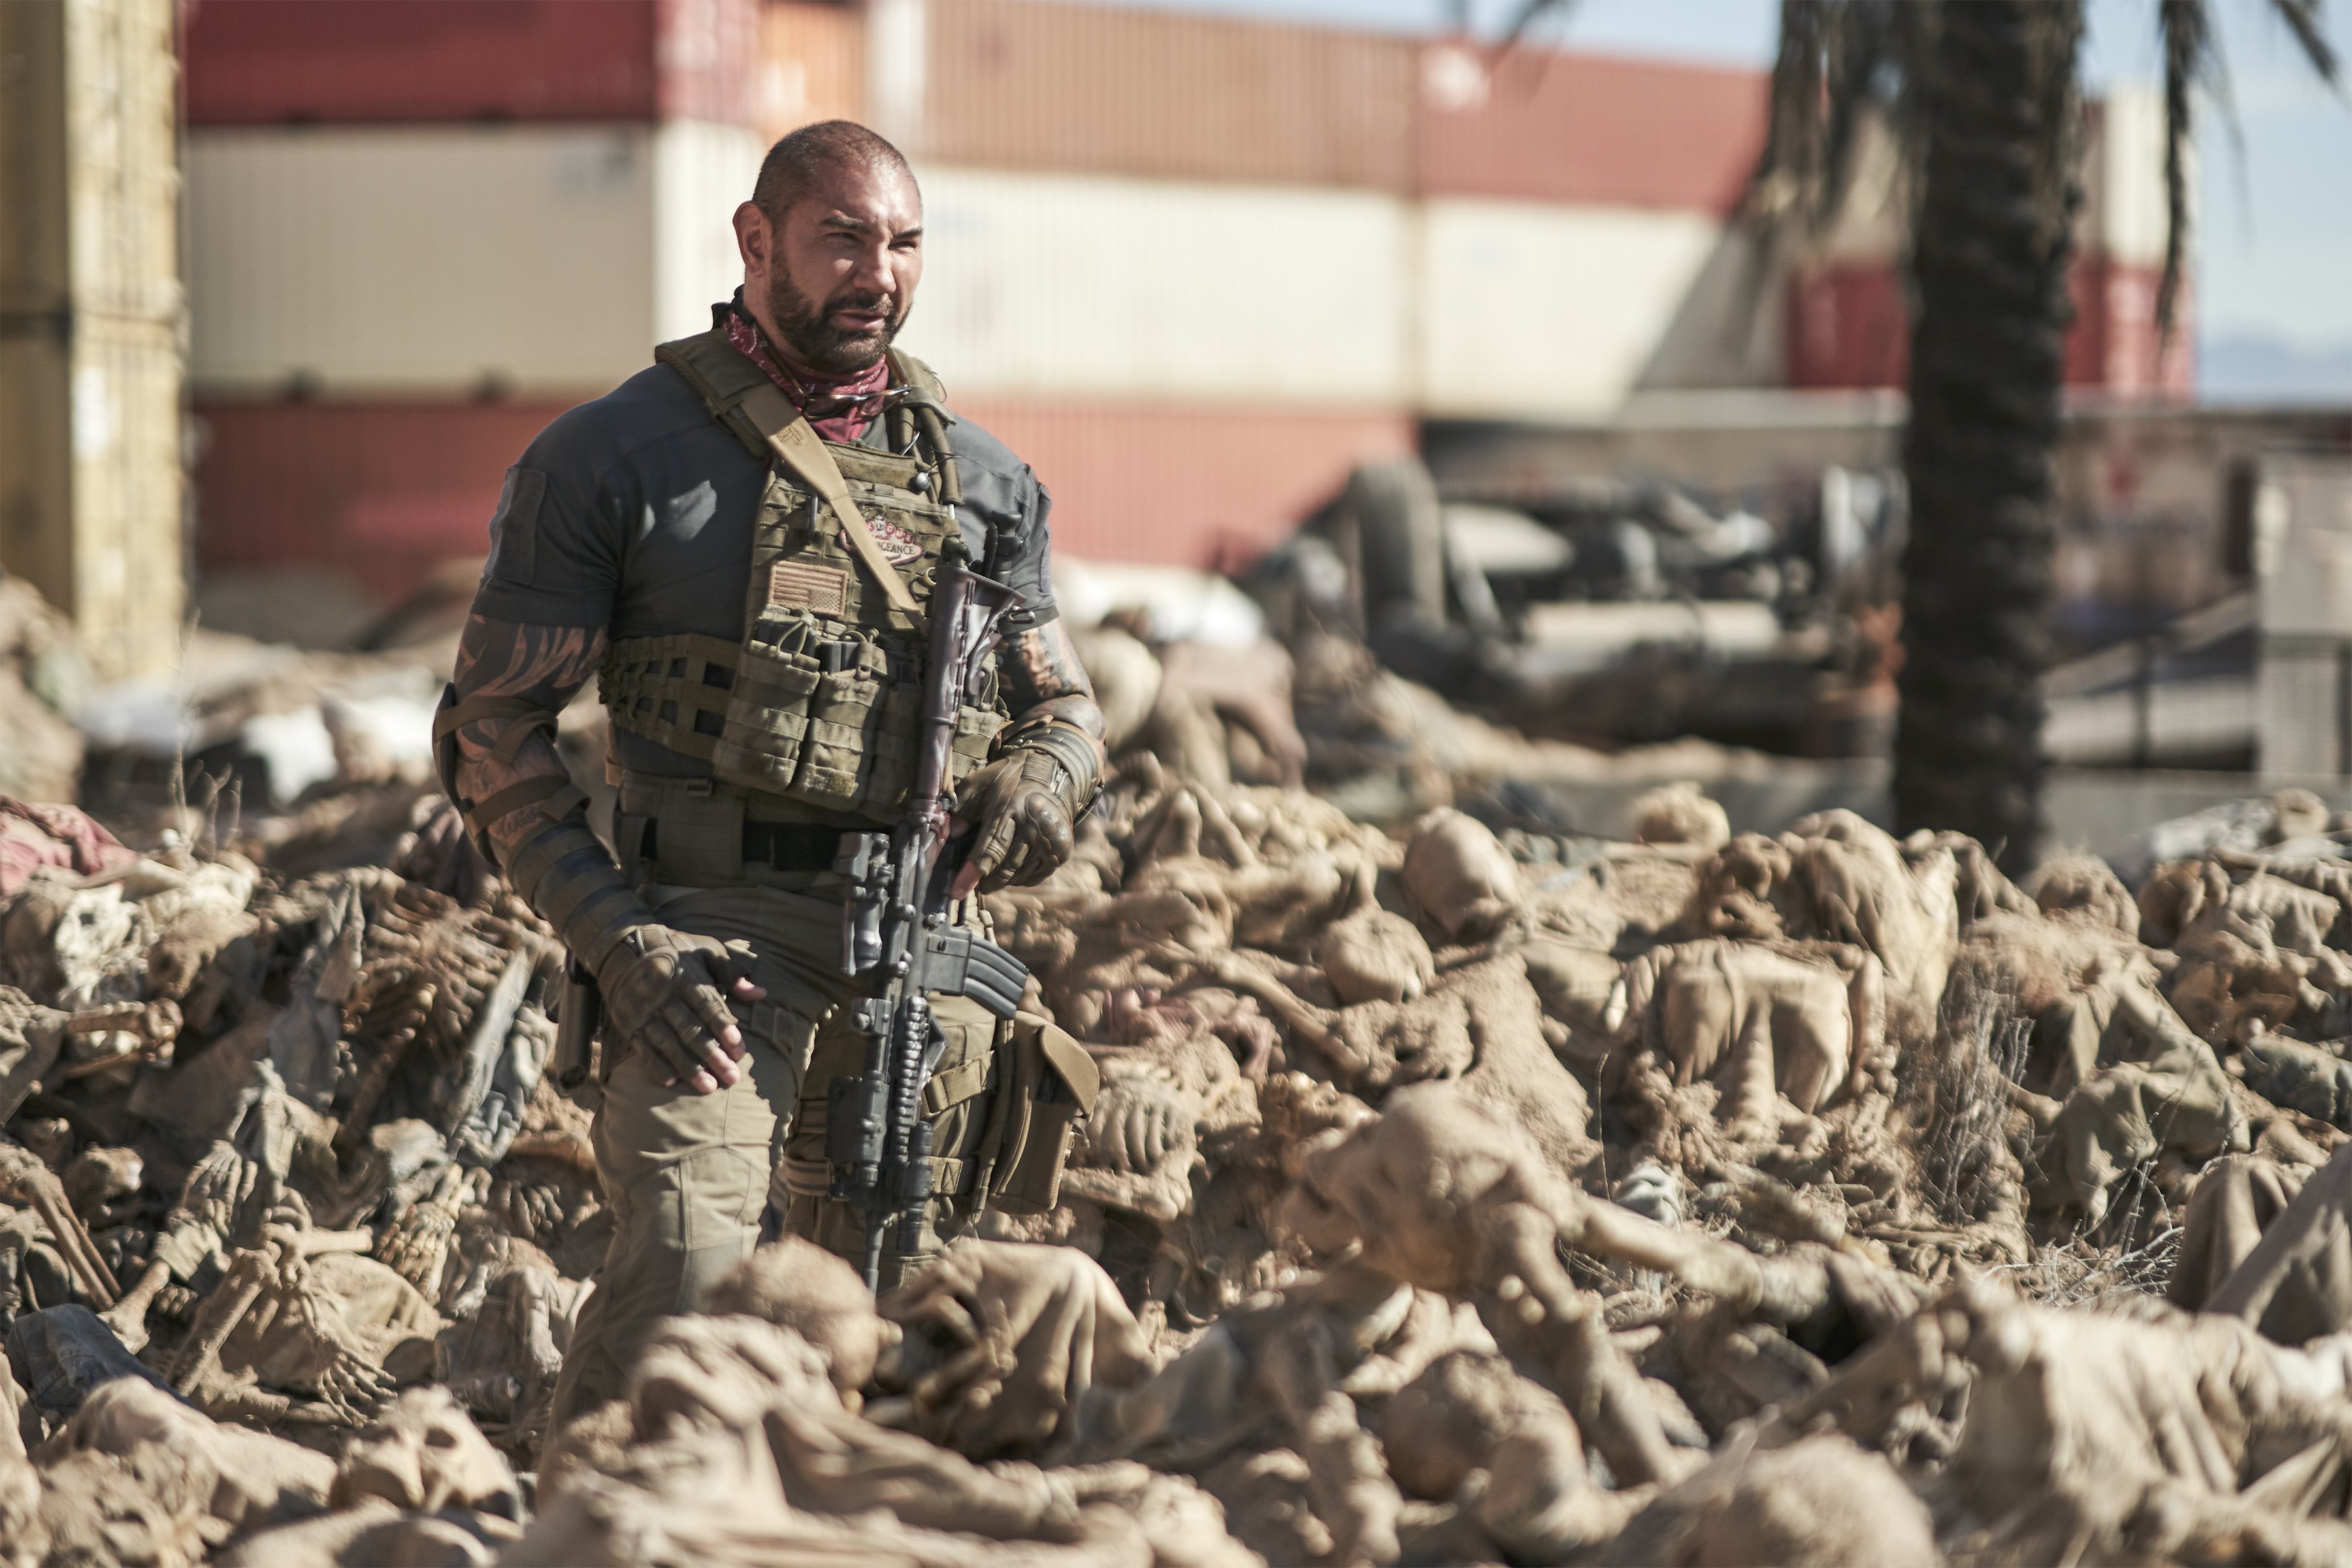 Army of the Dead Cast - Dave Bautista as Scott Ward